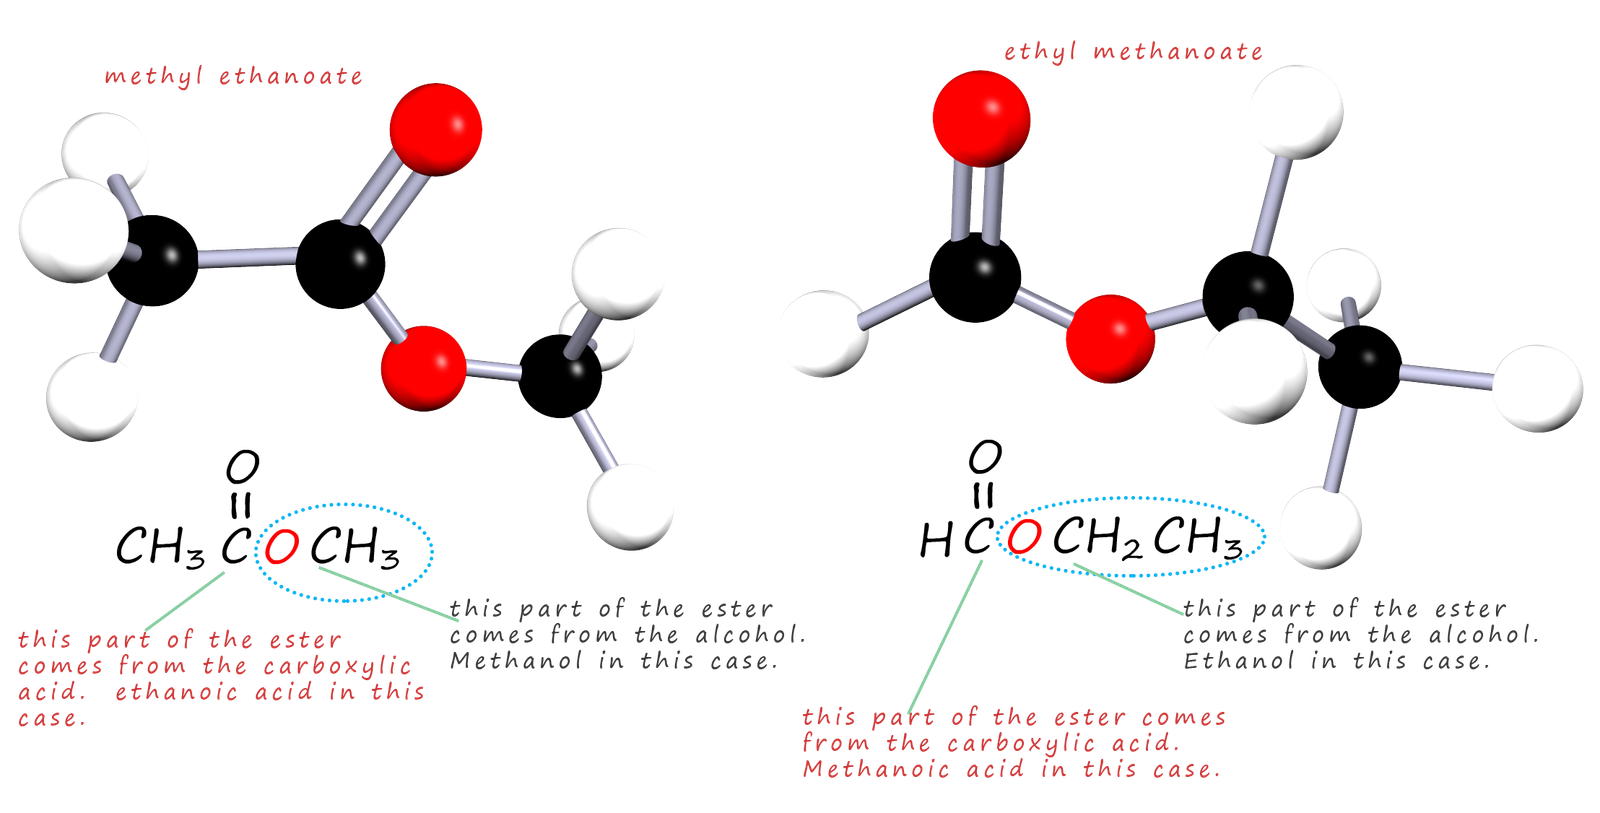 structure of the esters methyl ethanoate and ethyl methanoate